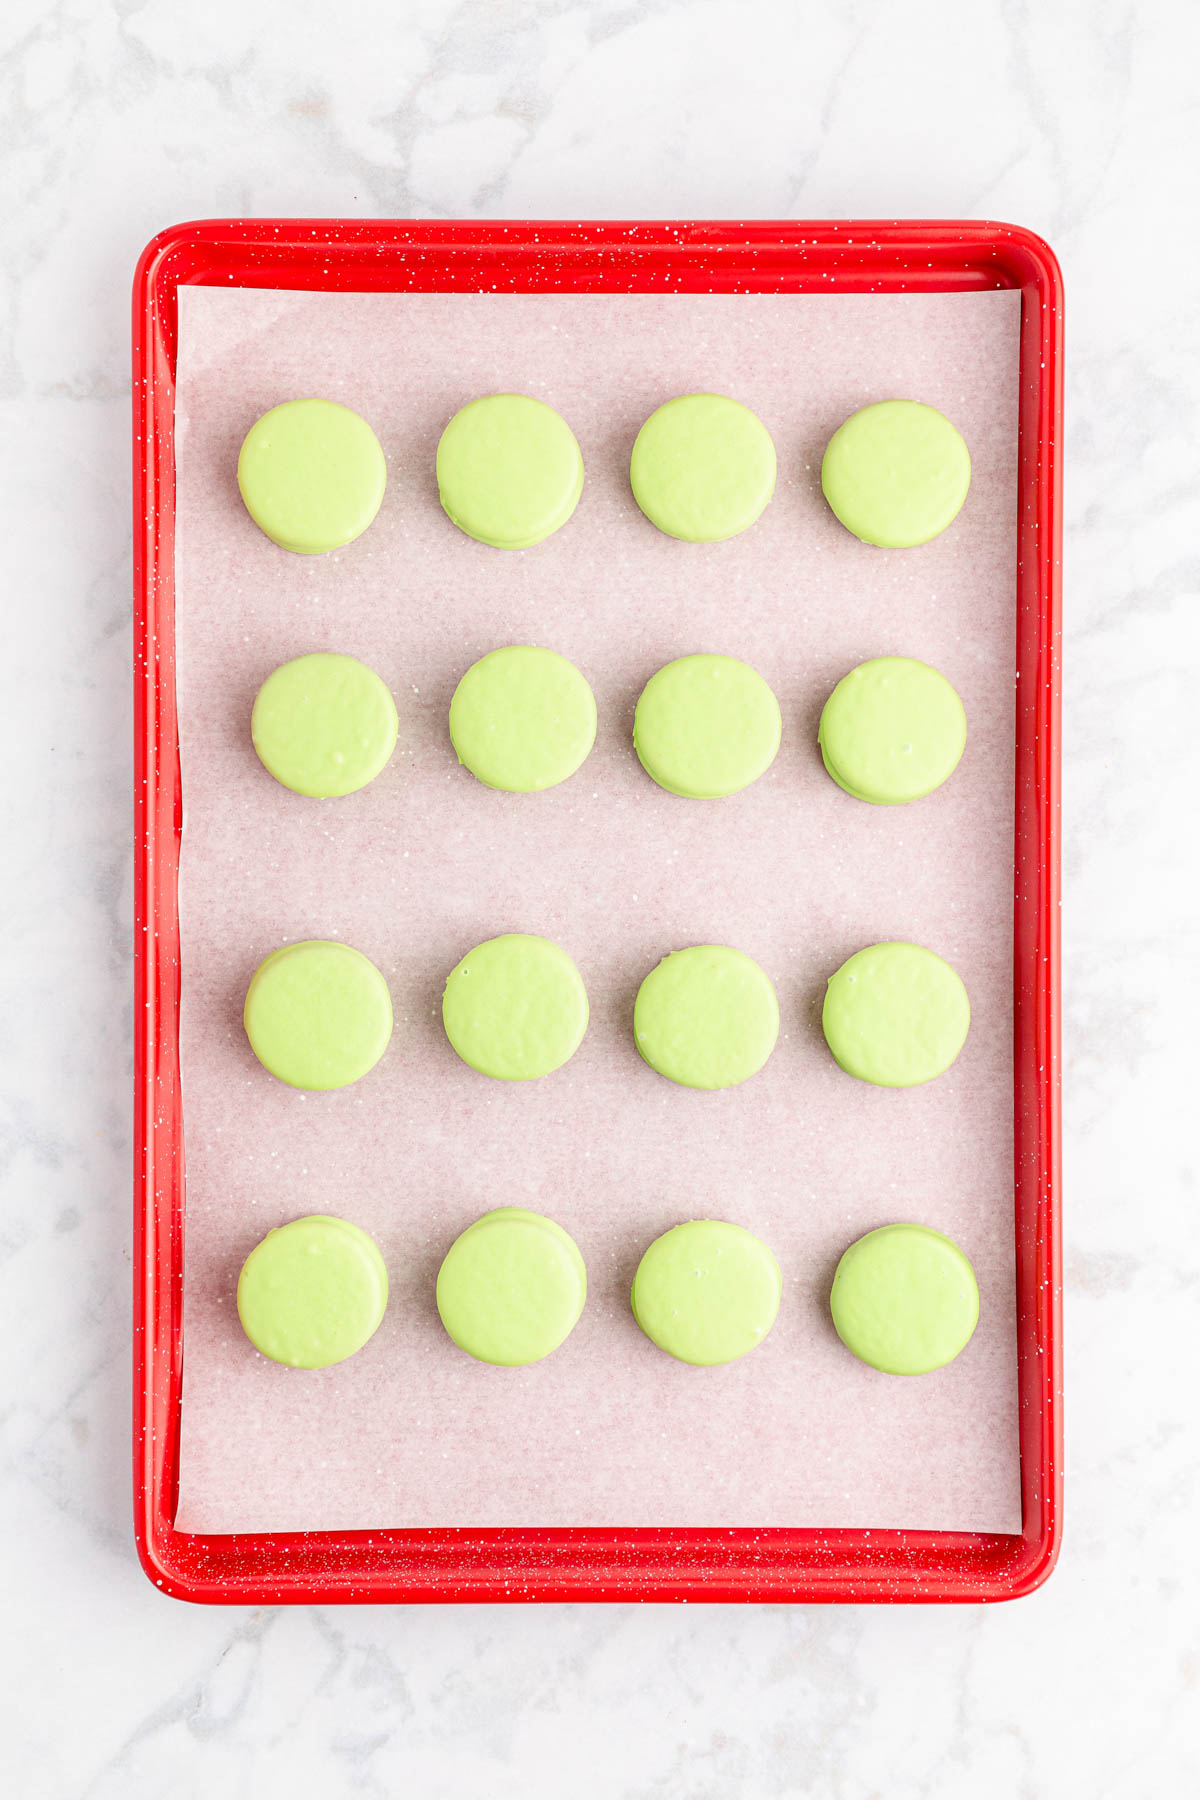 Green Oreos on a red baking sheet.